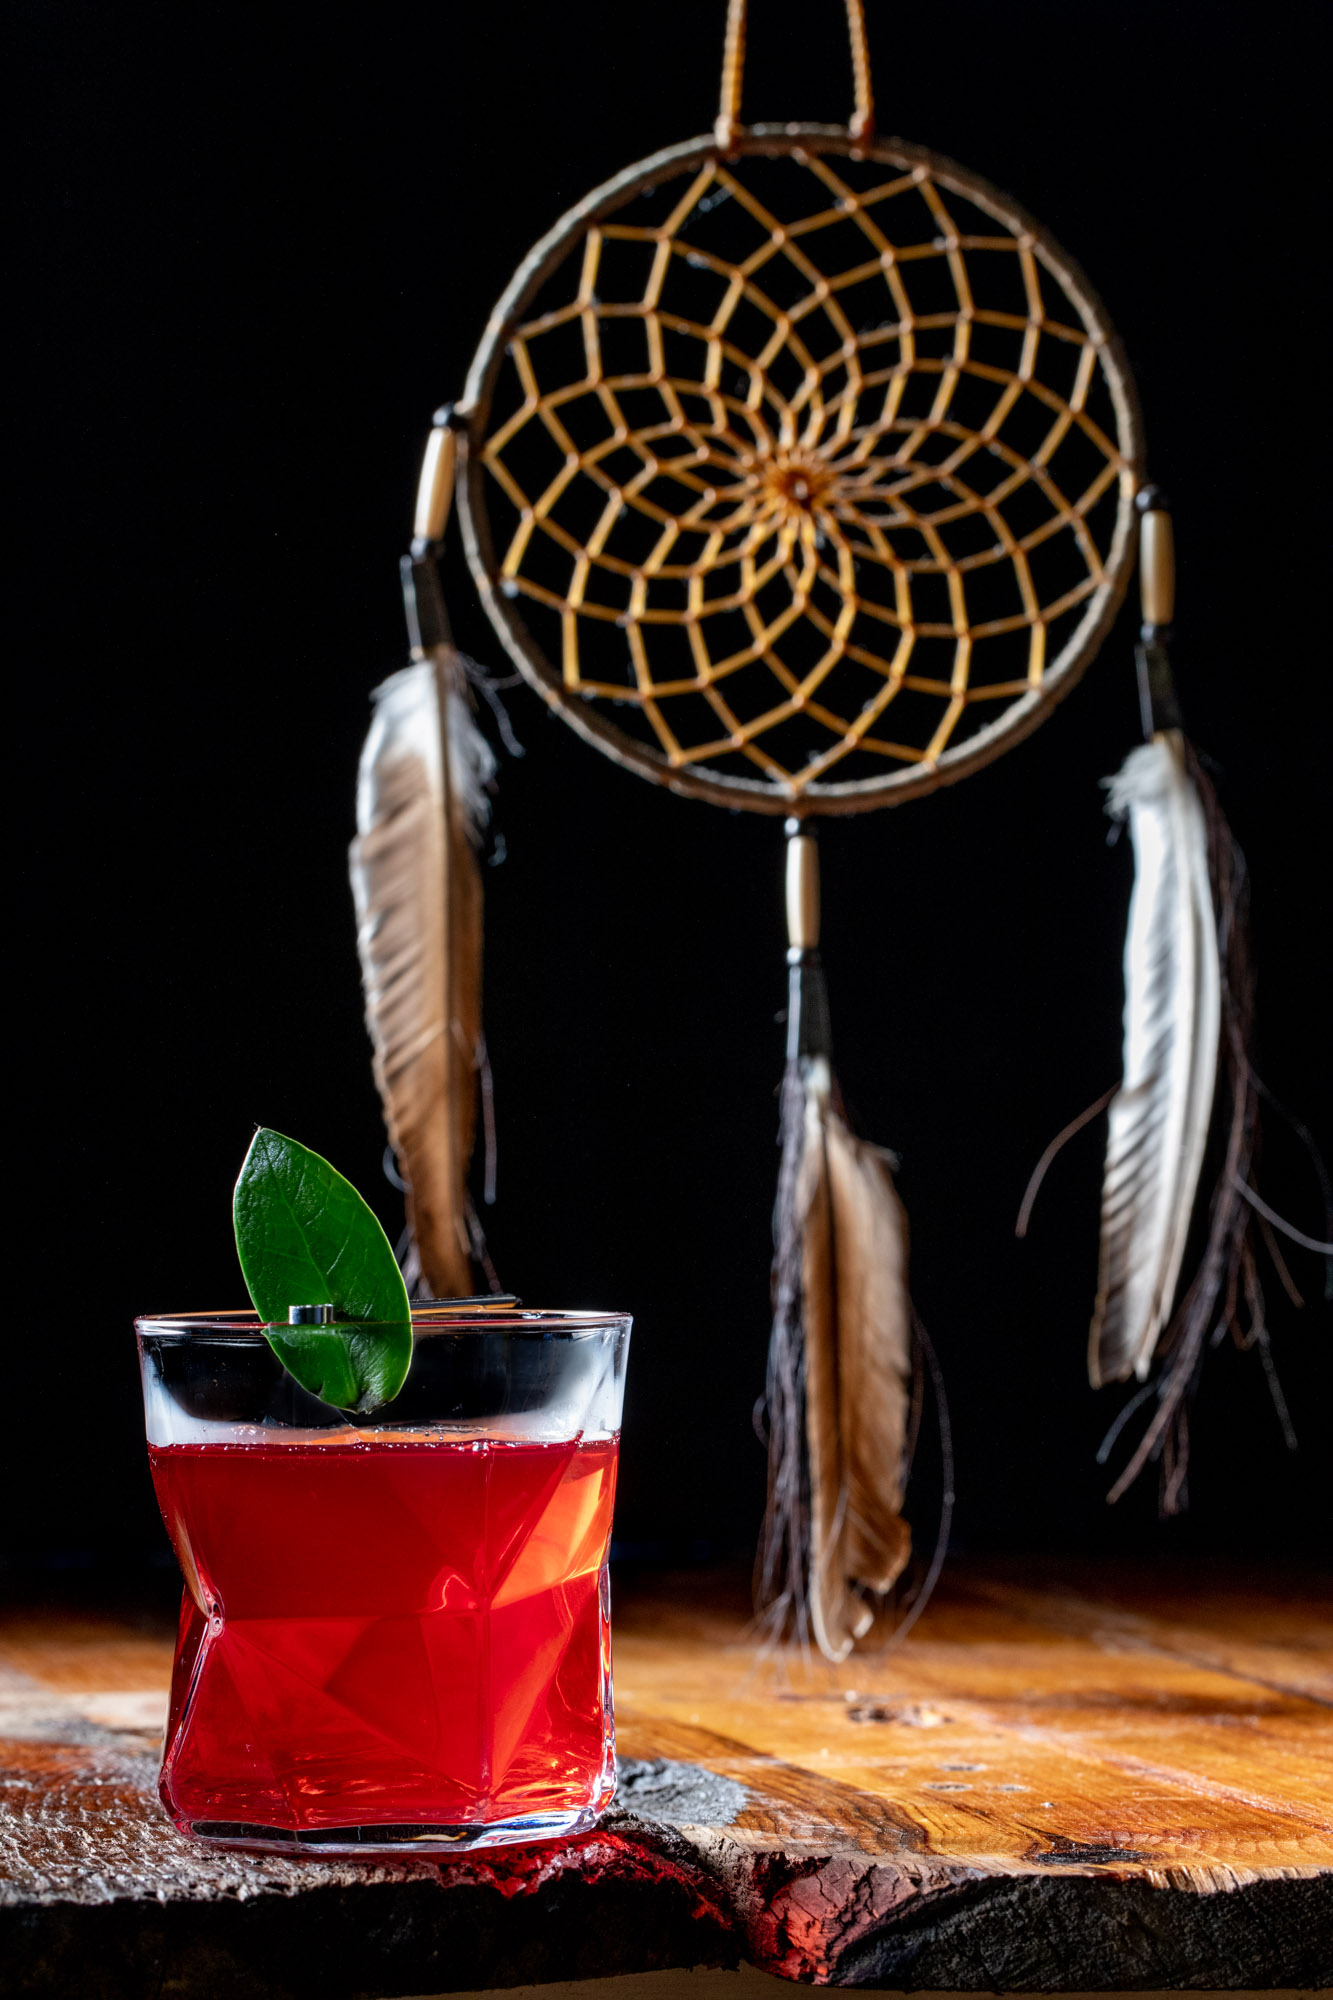 Dream catcher resting behind a glowing drink.